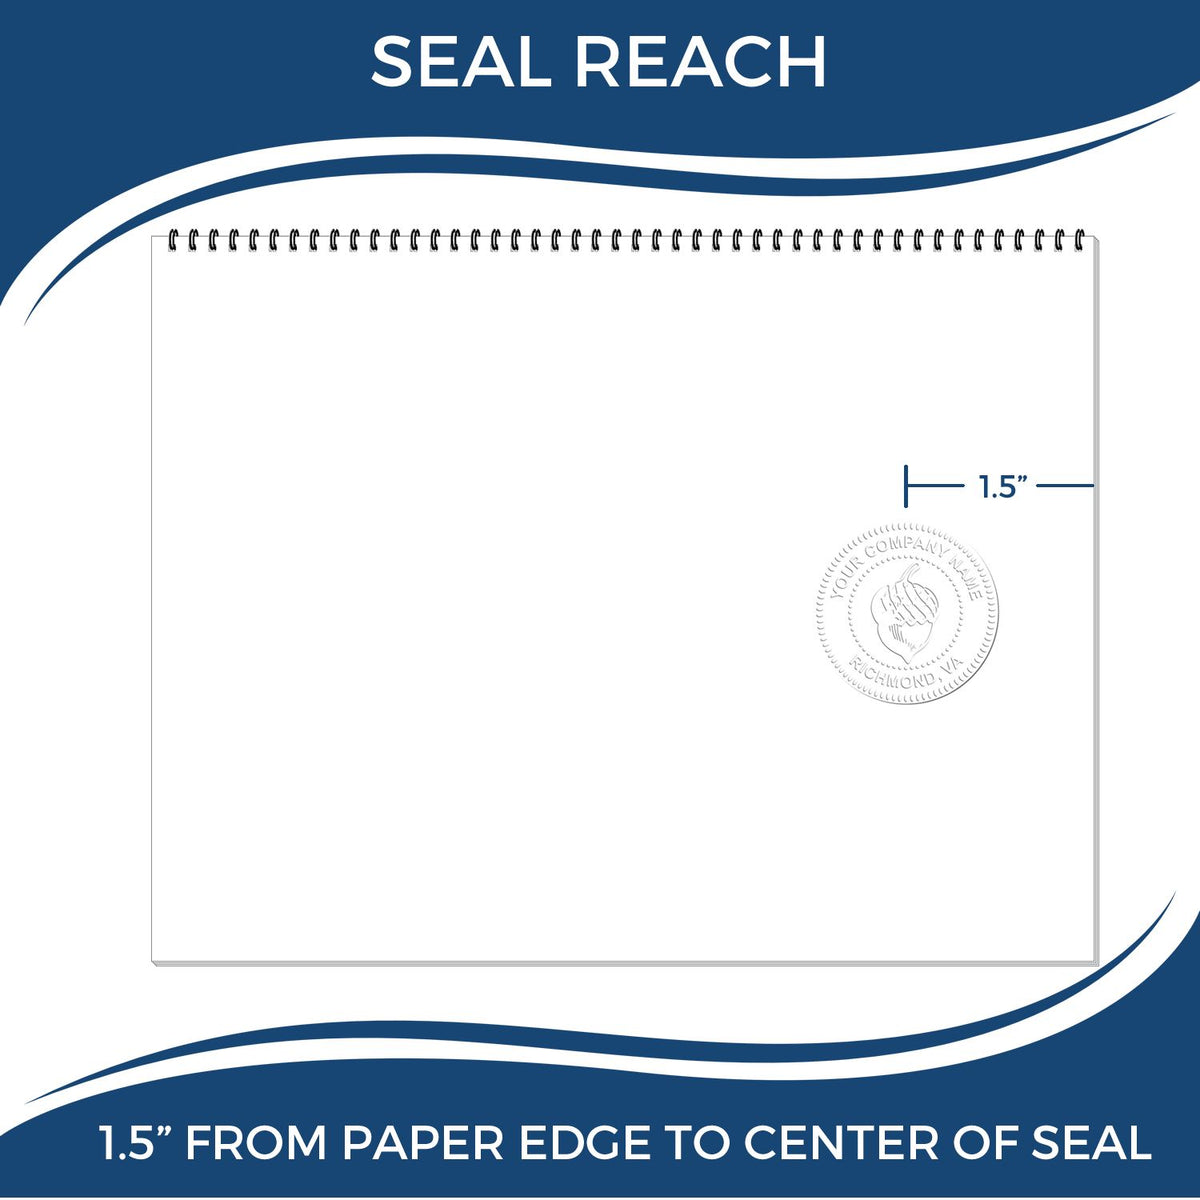 An infographic showing the seal reach which is represented by a ruler and a miniature seal image of the Hybrid West Virginia Engineer Seal